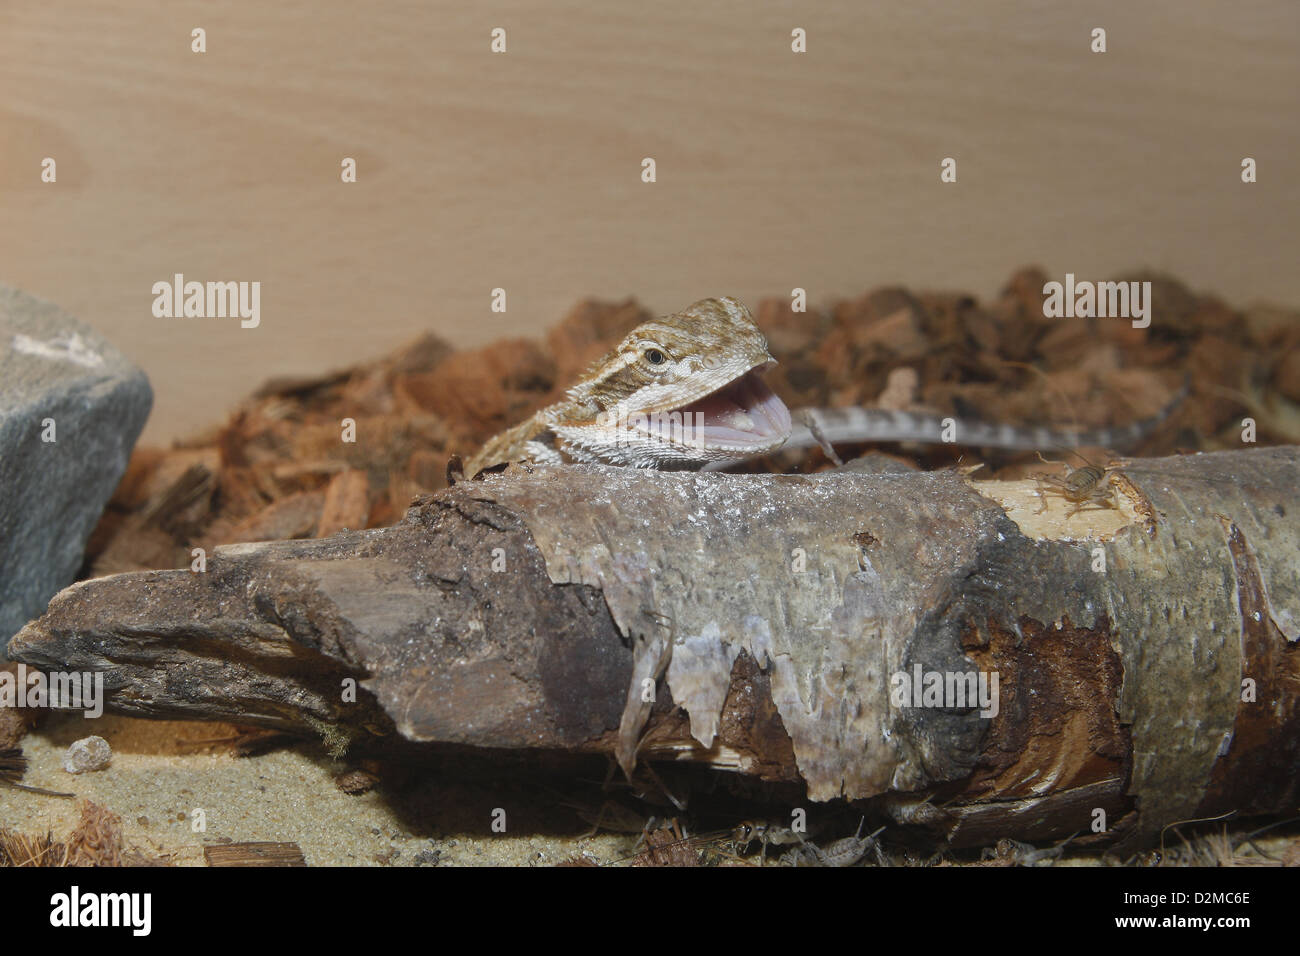 Inland or Central Bearded dragon about to eat brown cricket Pogona vitticeps, Acheta domesticus Stock Photo